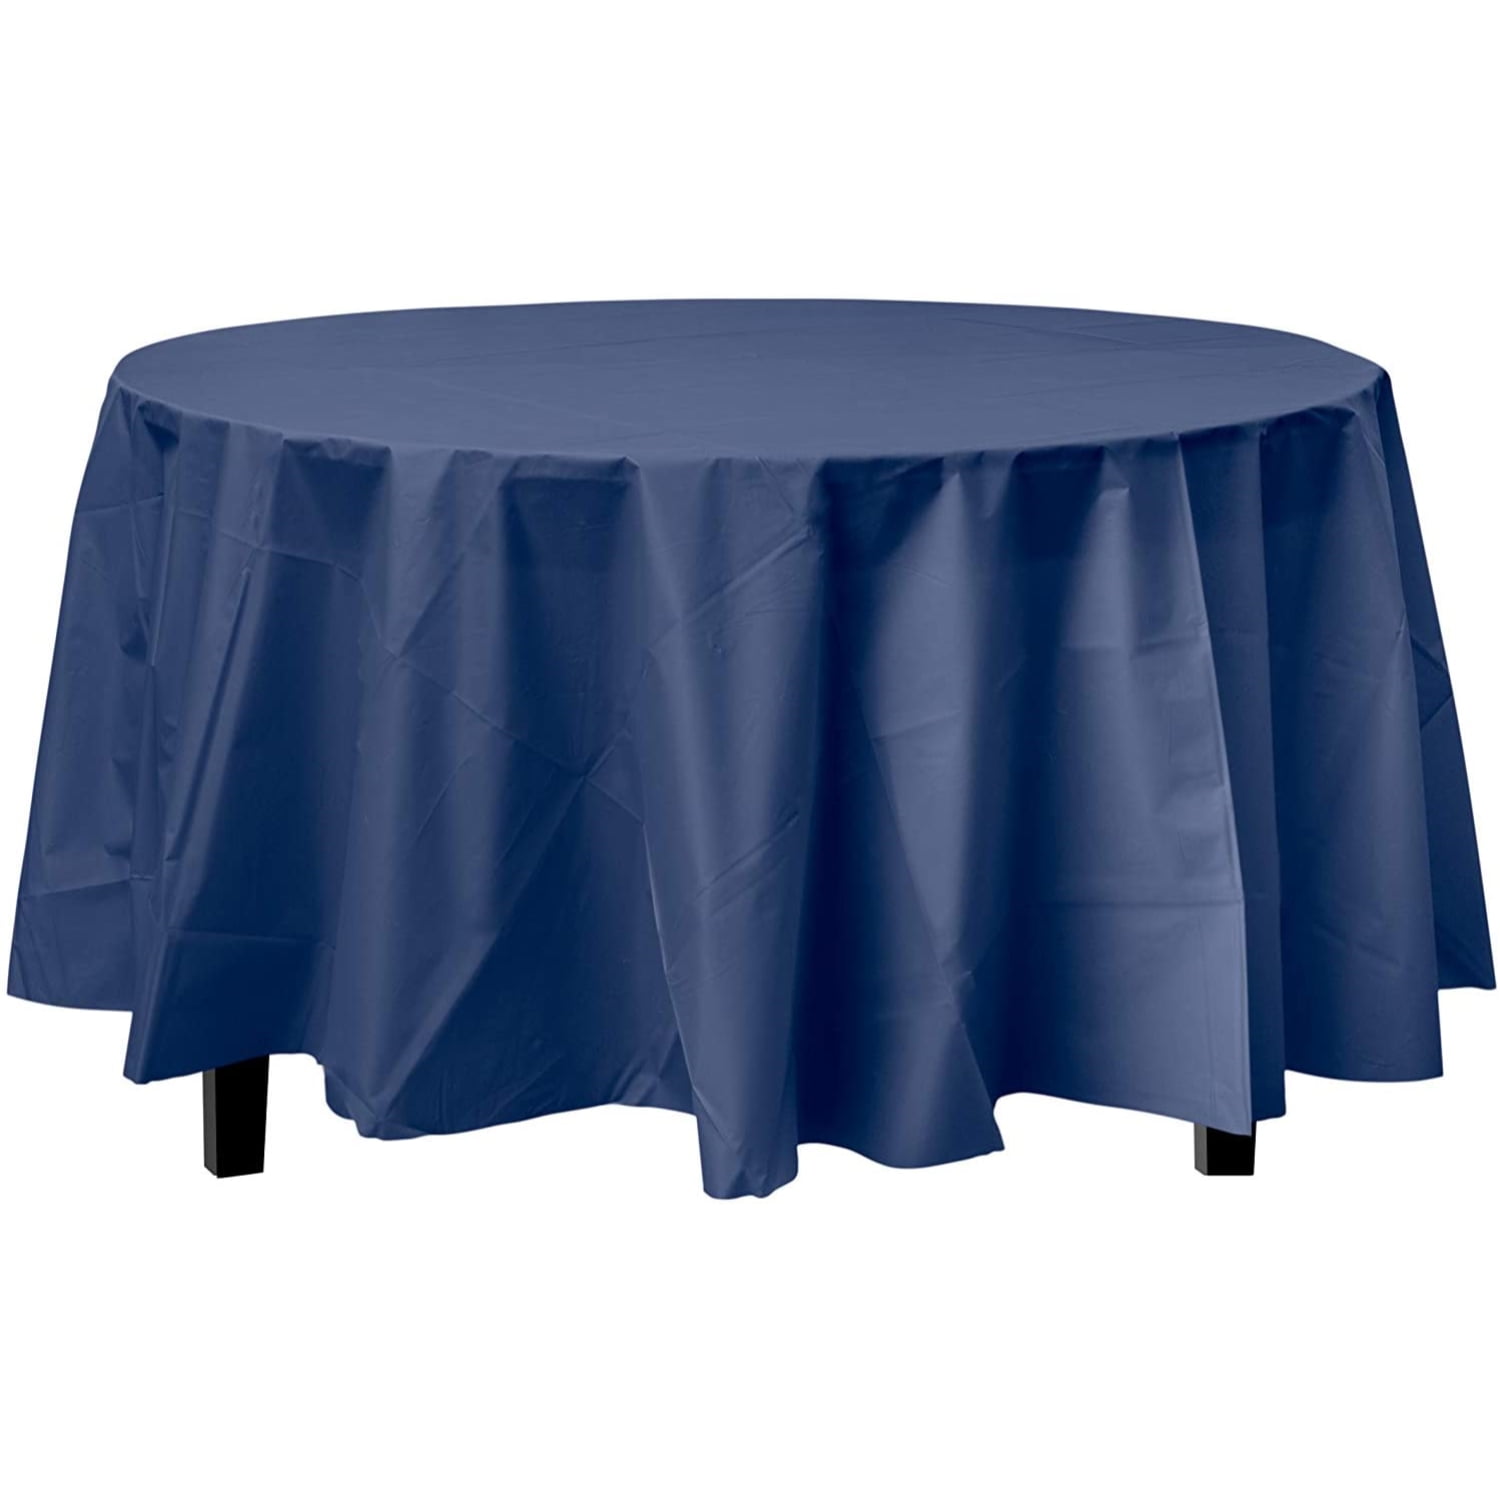 Plastic TABLE COVERS Table Cloth Cover Party Catering Events Tableware Banquet BUY ONE TABLE CLOTH GET ONE FREE MATCHING TABLE SKIRT!! Baby Blue 